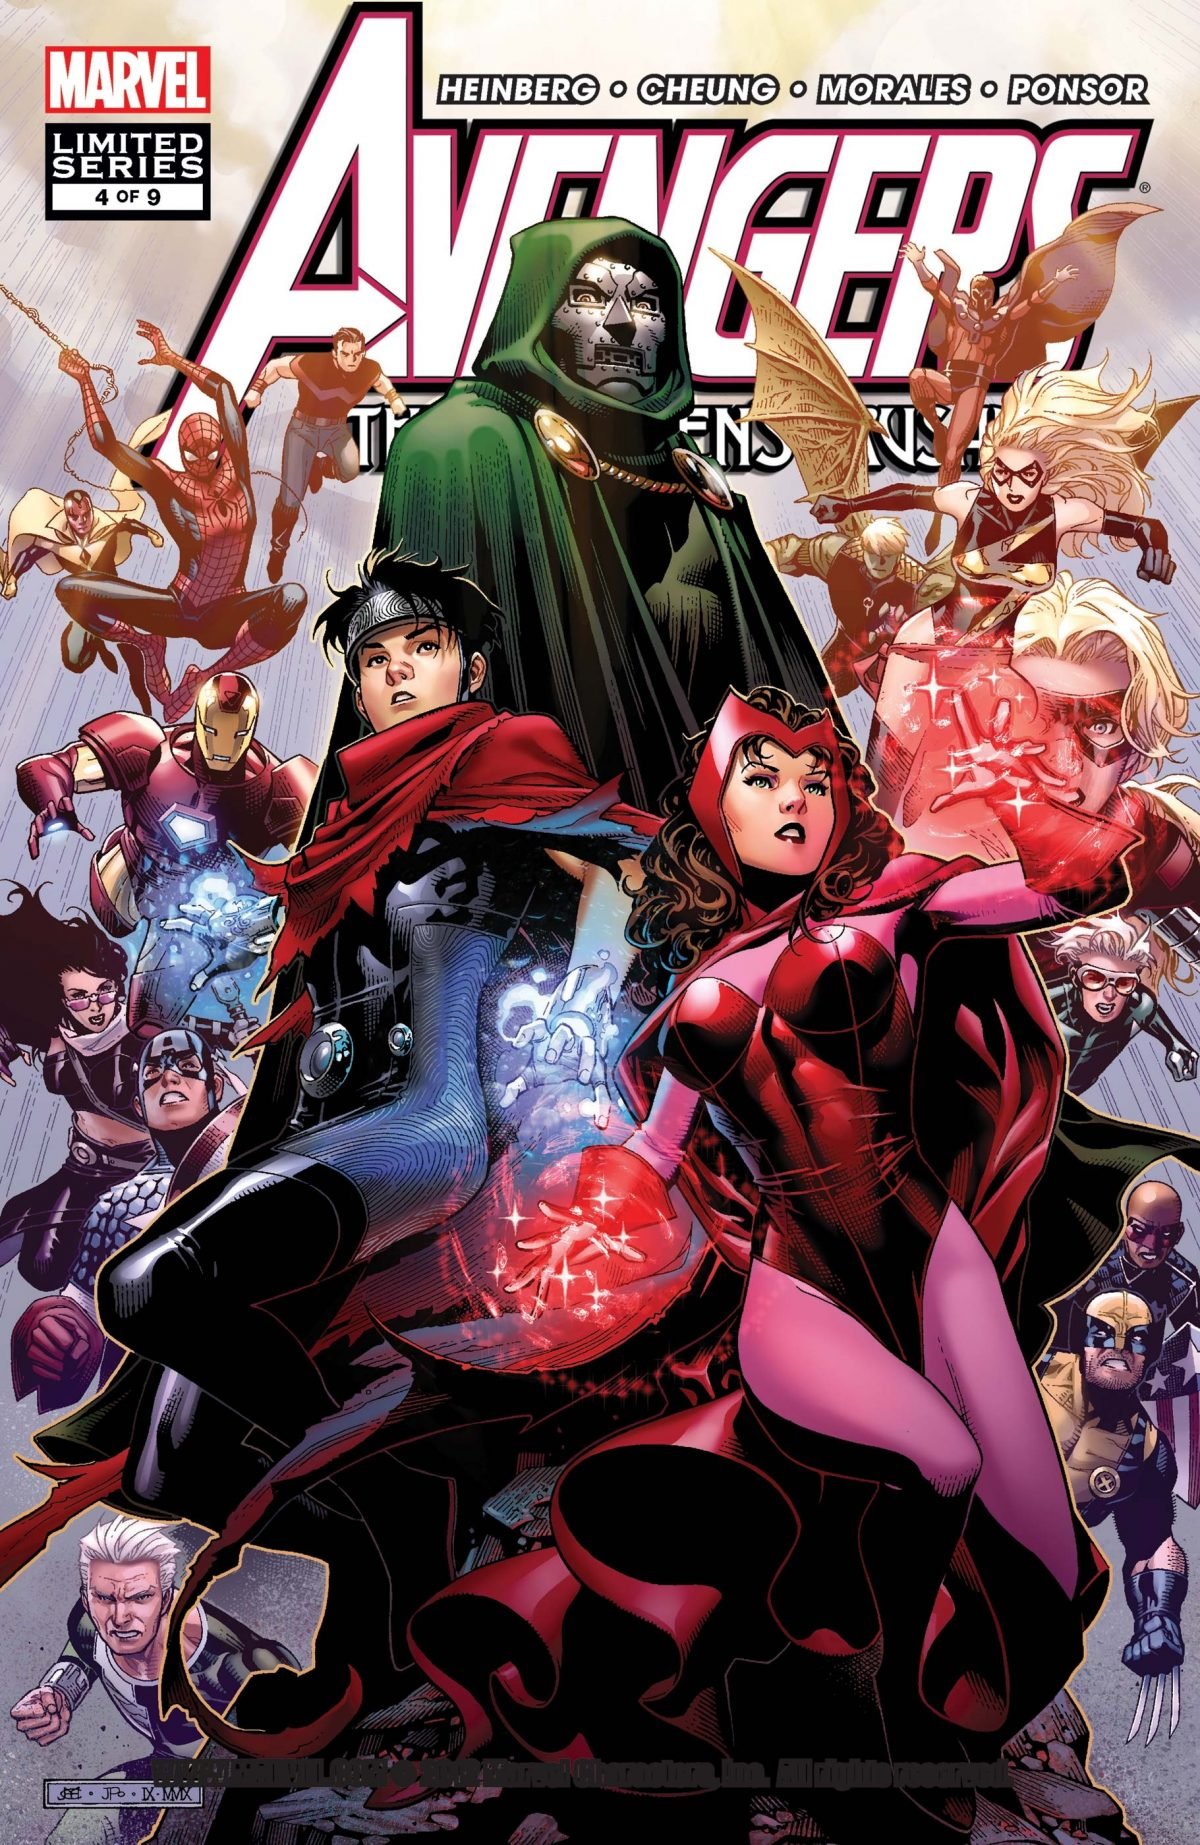 The cover of issue 4 of 9 of Avengers: Children's Crusade.